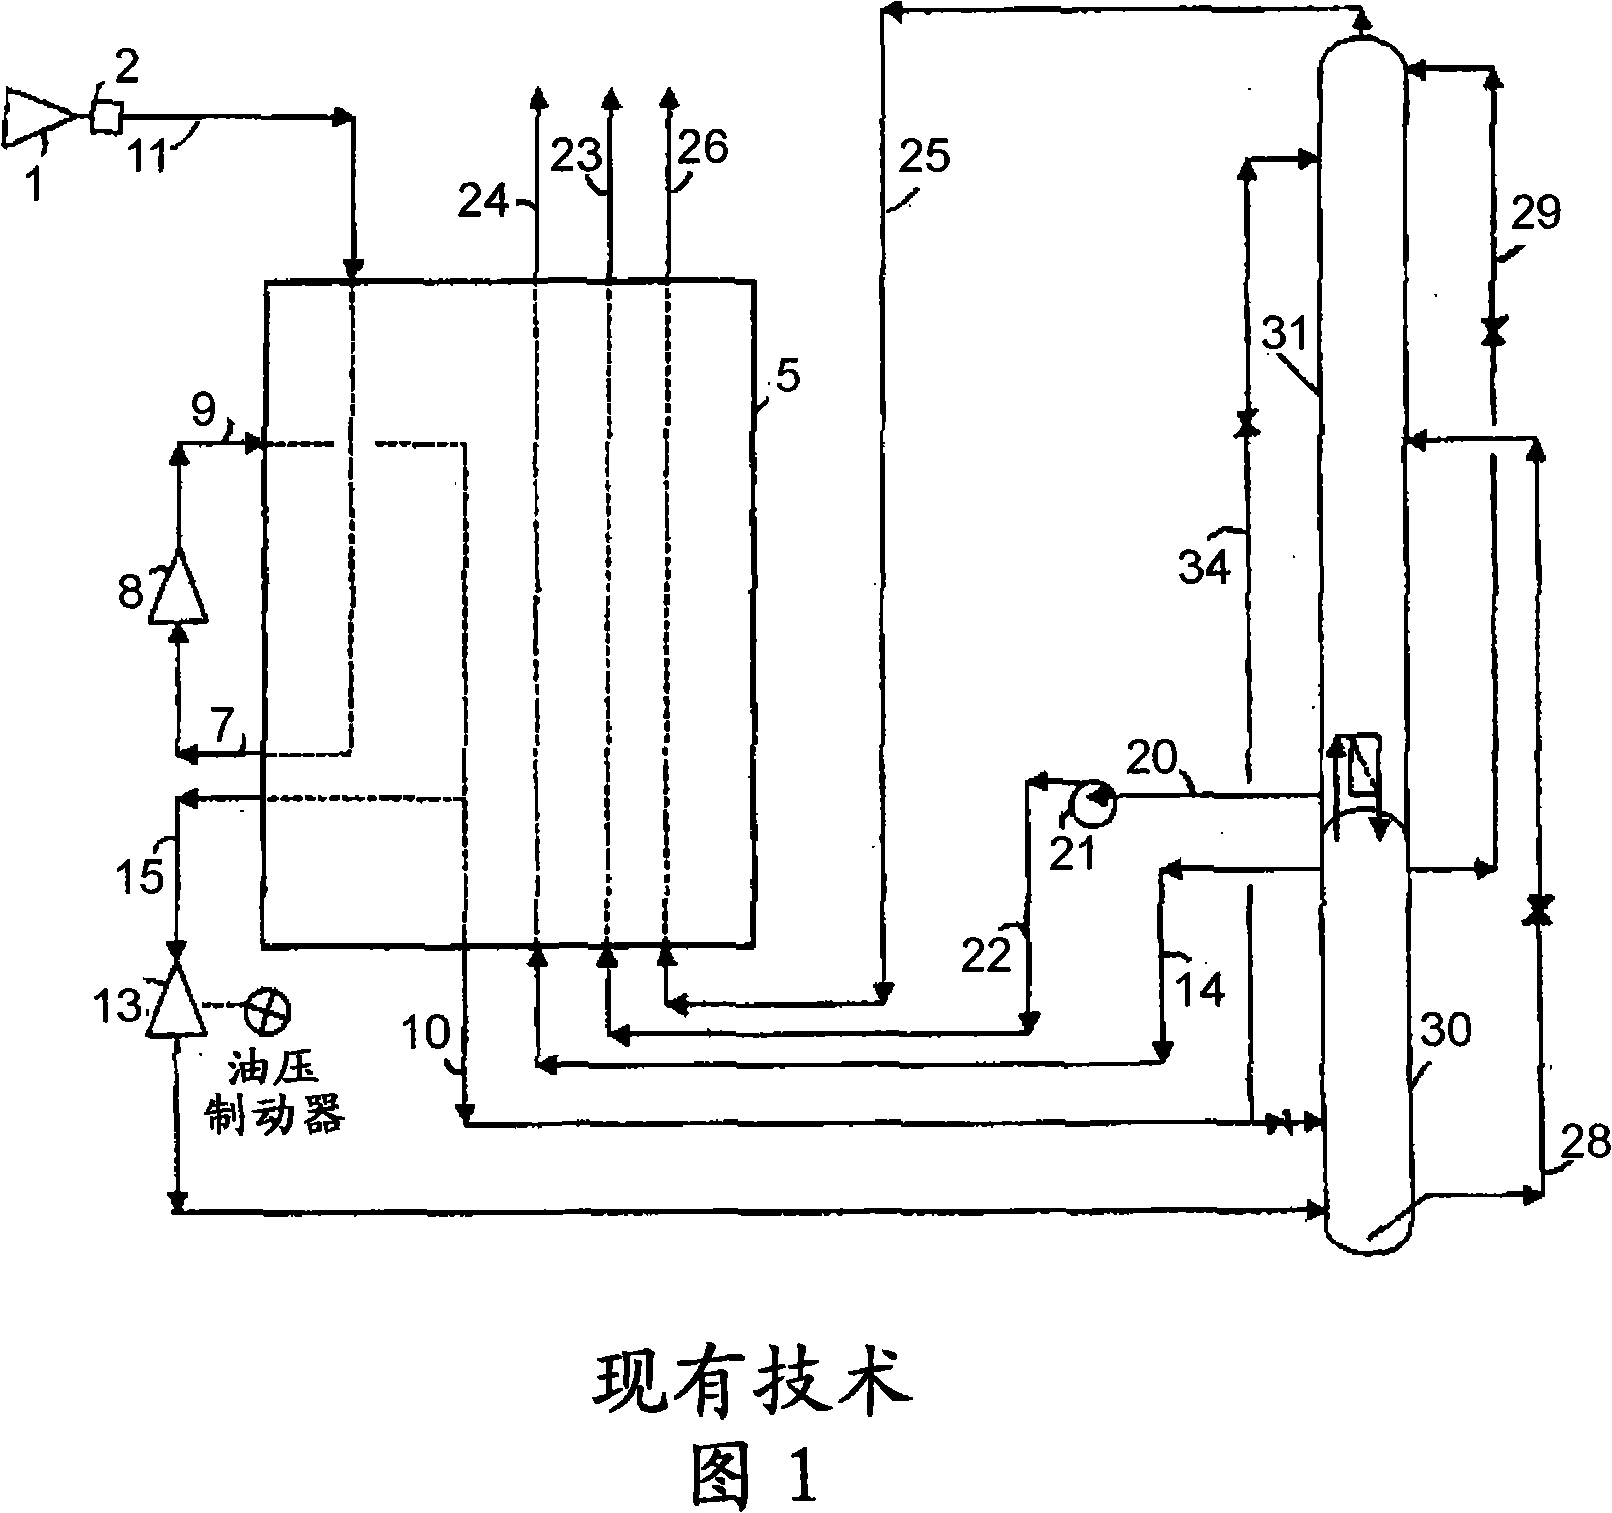 Process and apparatus for the separation of air by cryogenic distillation